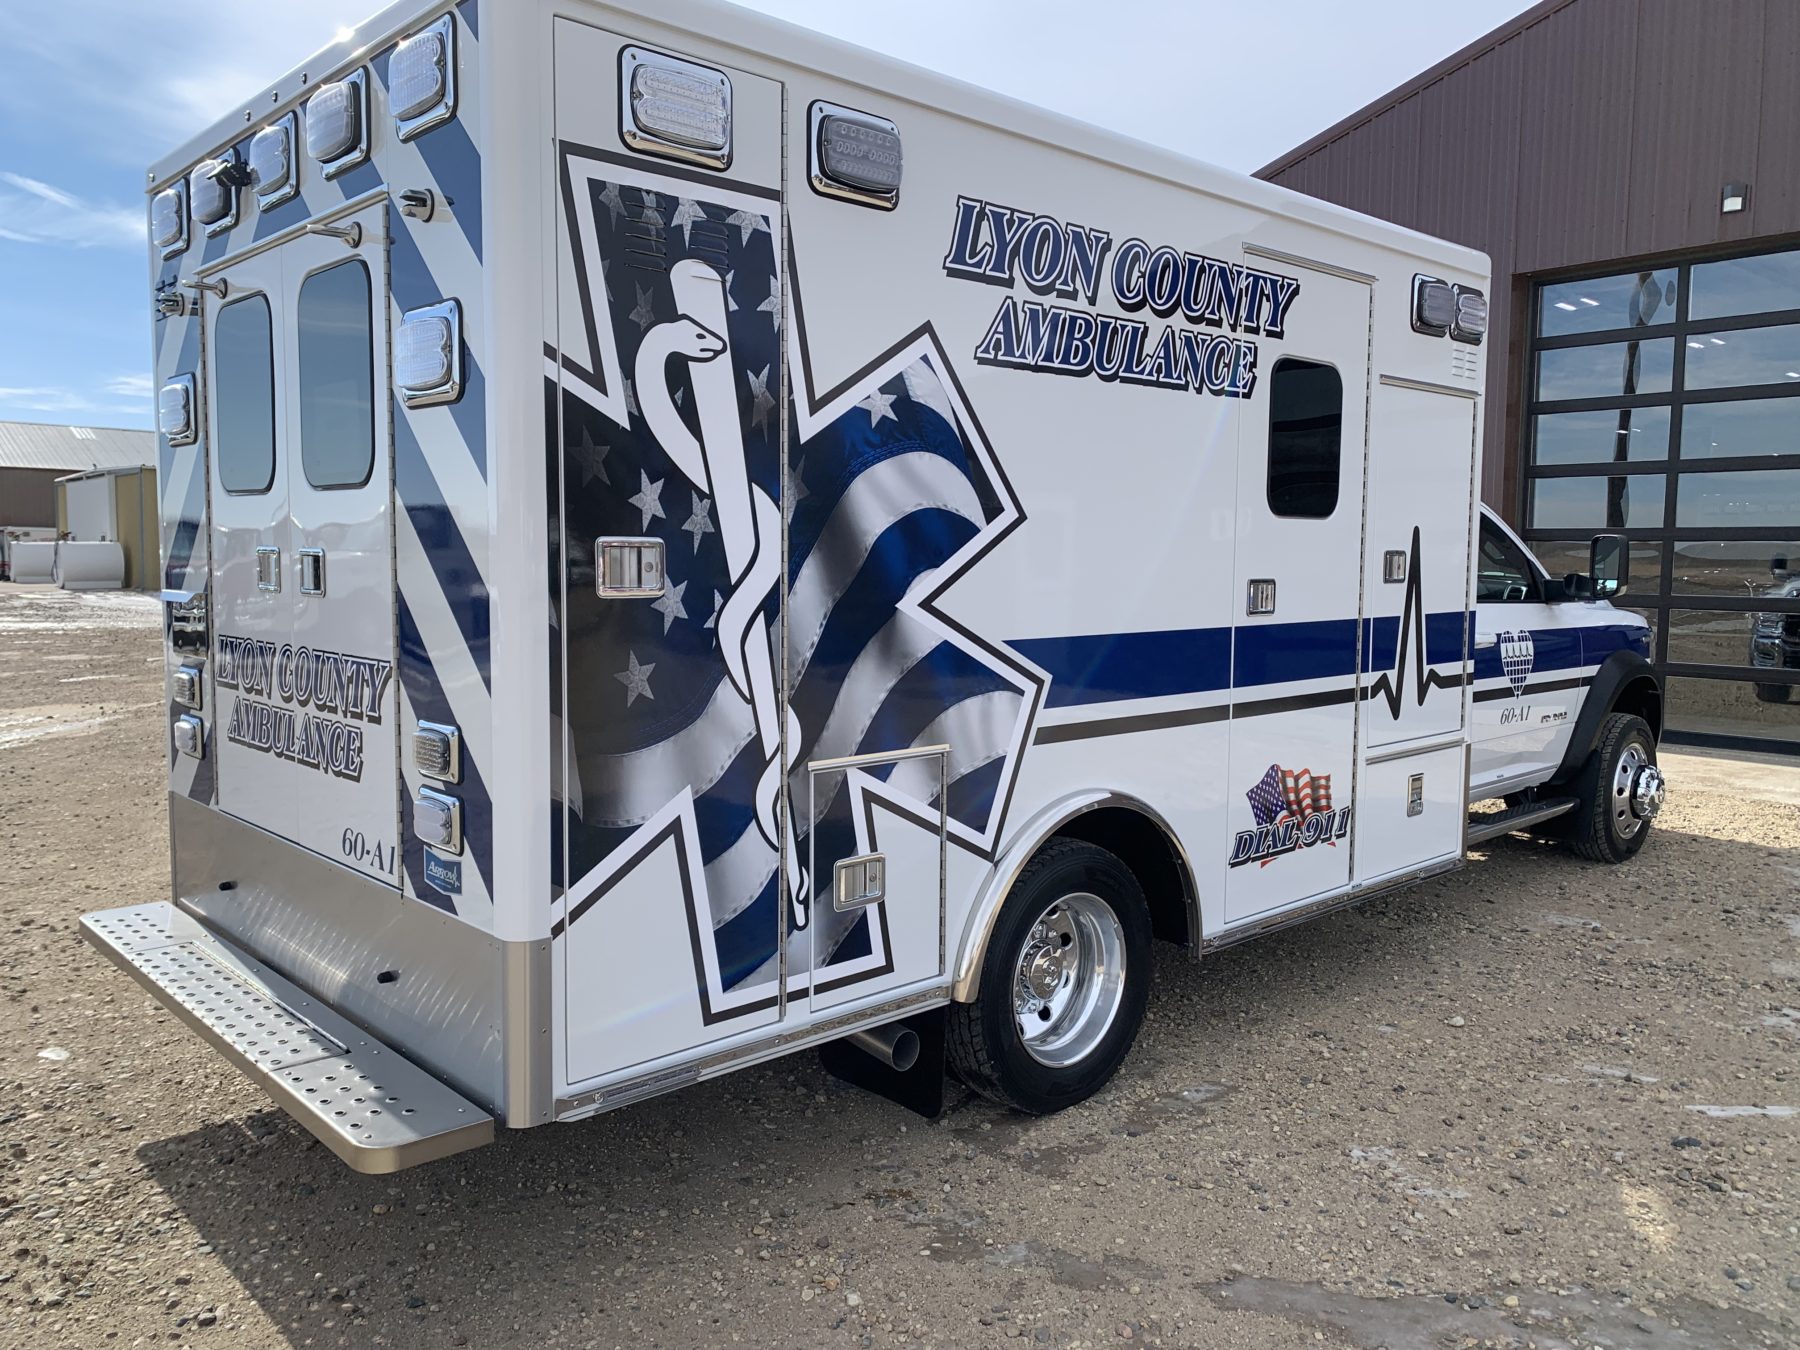 2021 Ram 4500 4x4 Heavy Duty Ambulance For Sale – Picture 6